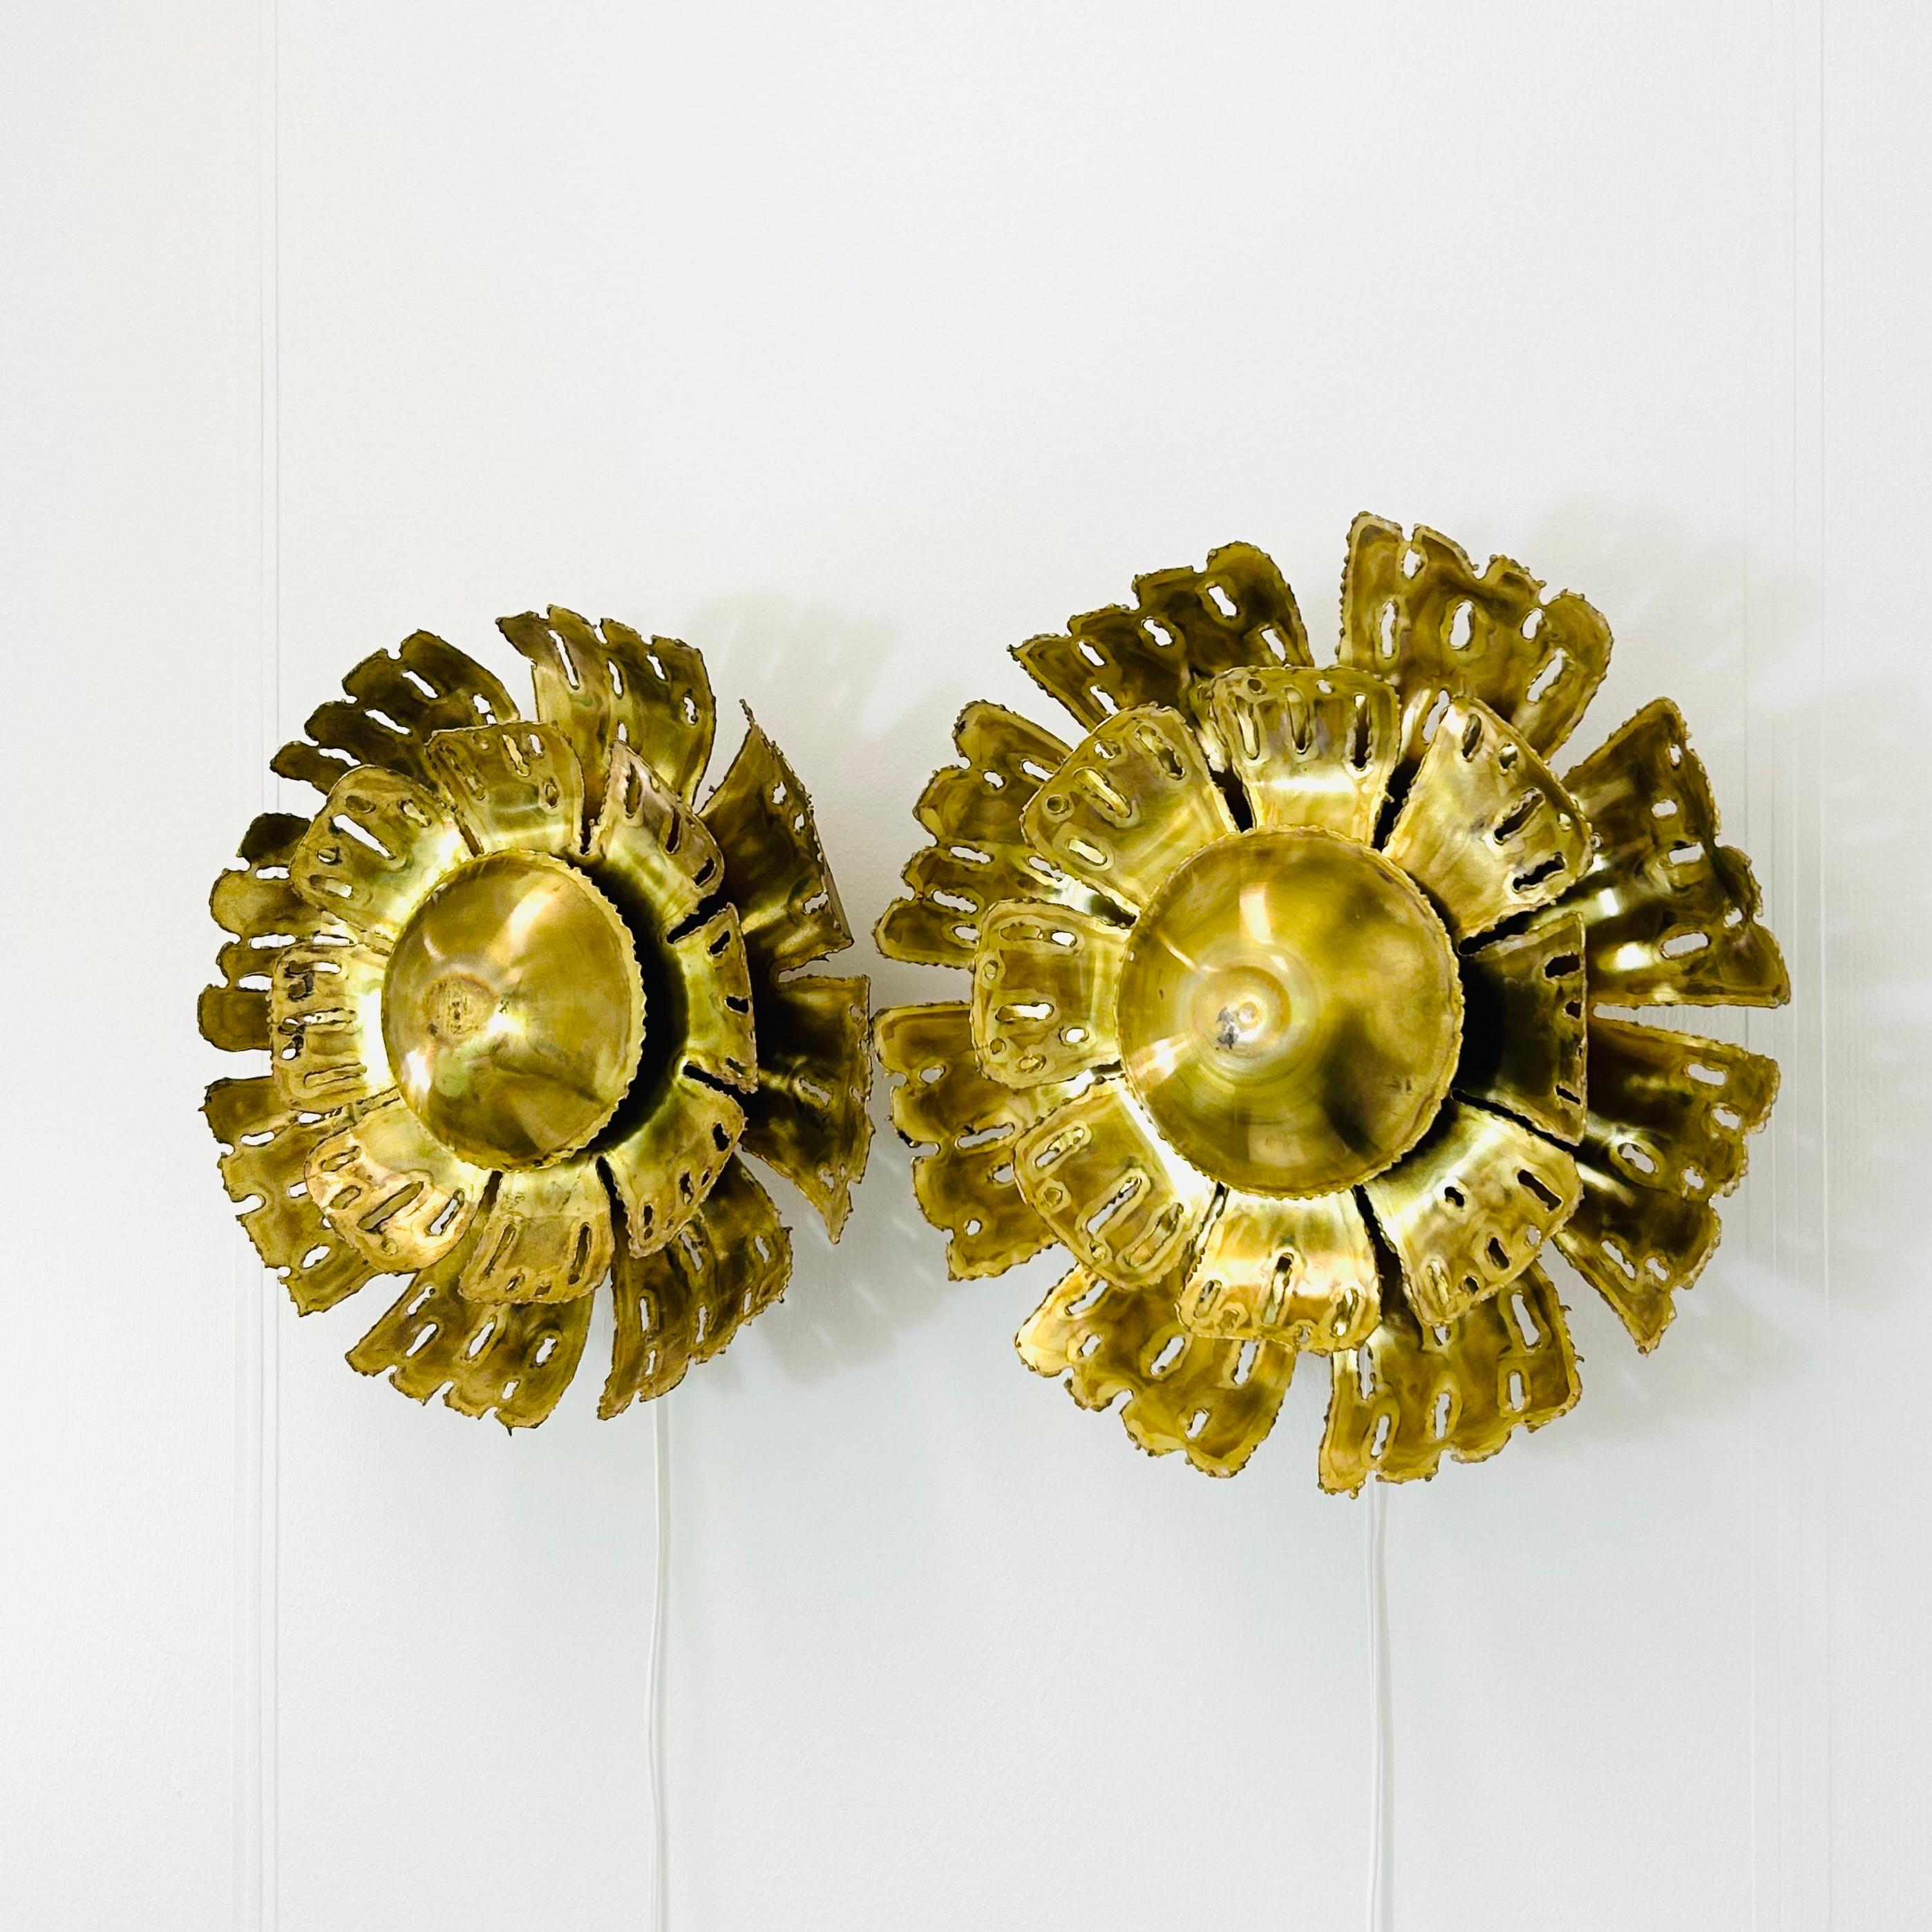 Pair of Large Brass Wall Lamps by Svend Aage Holm Sorensen, 1960s, Denmark For Sale 2